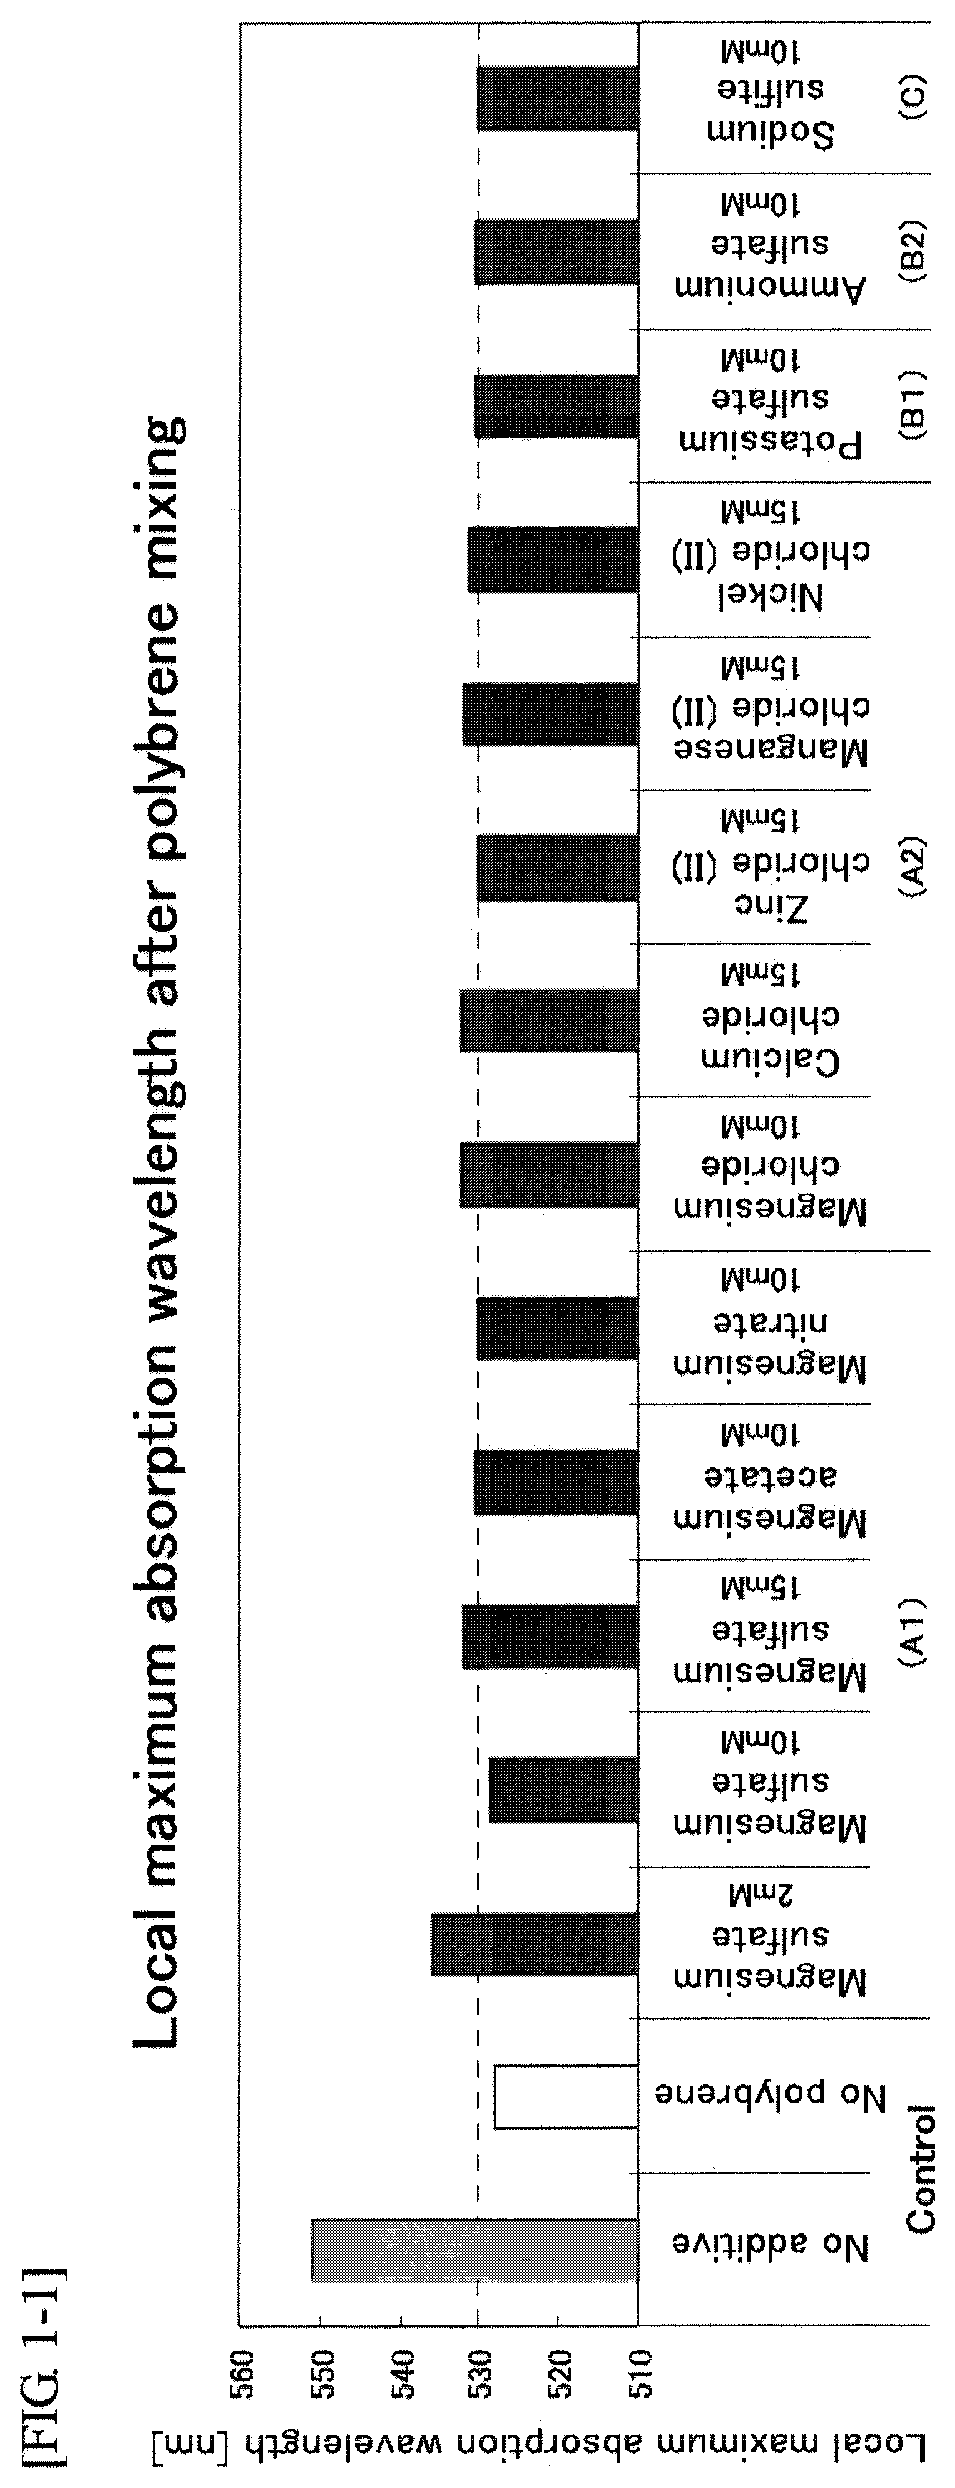 Immunochromatographic test strip for detecting object in red blood cell-containing sample and immunochromatography using the test strip